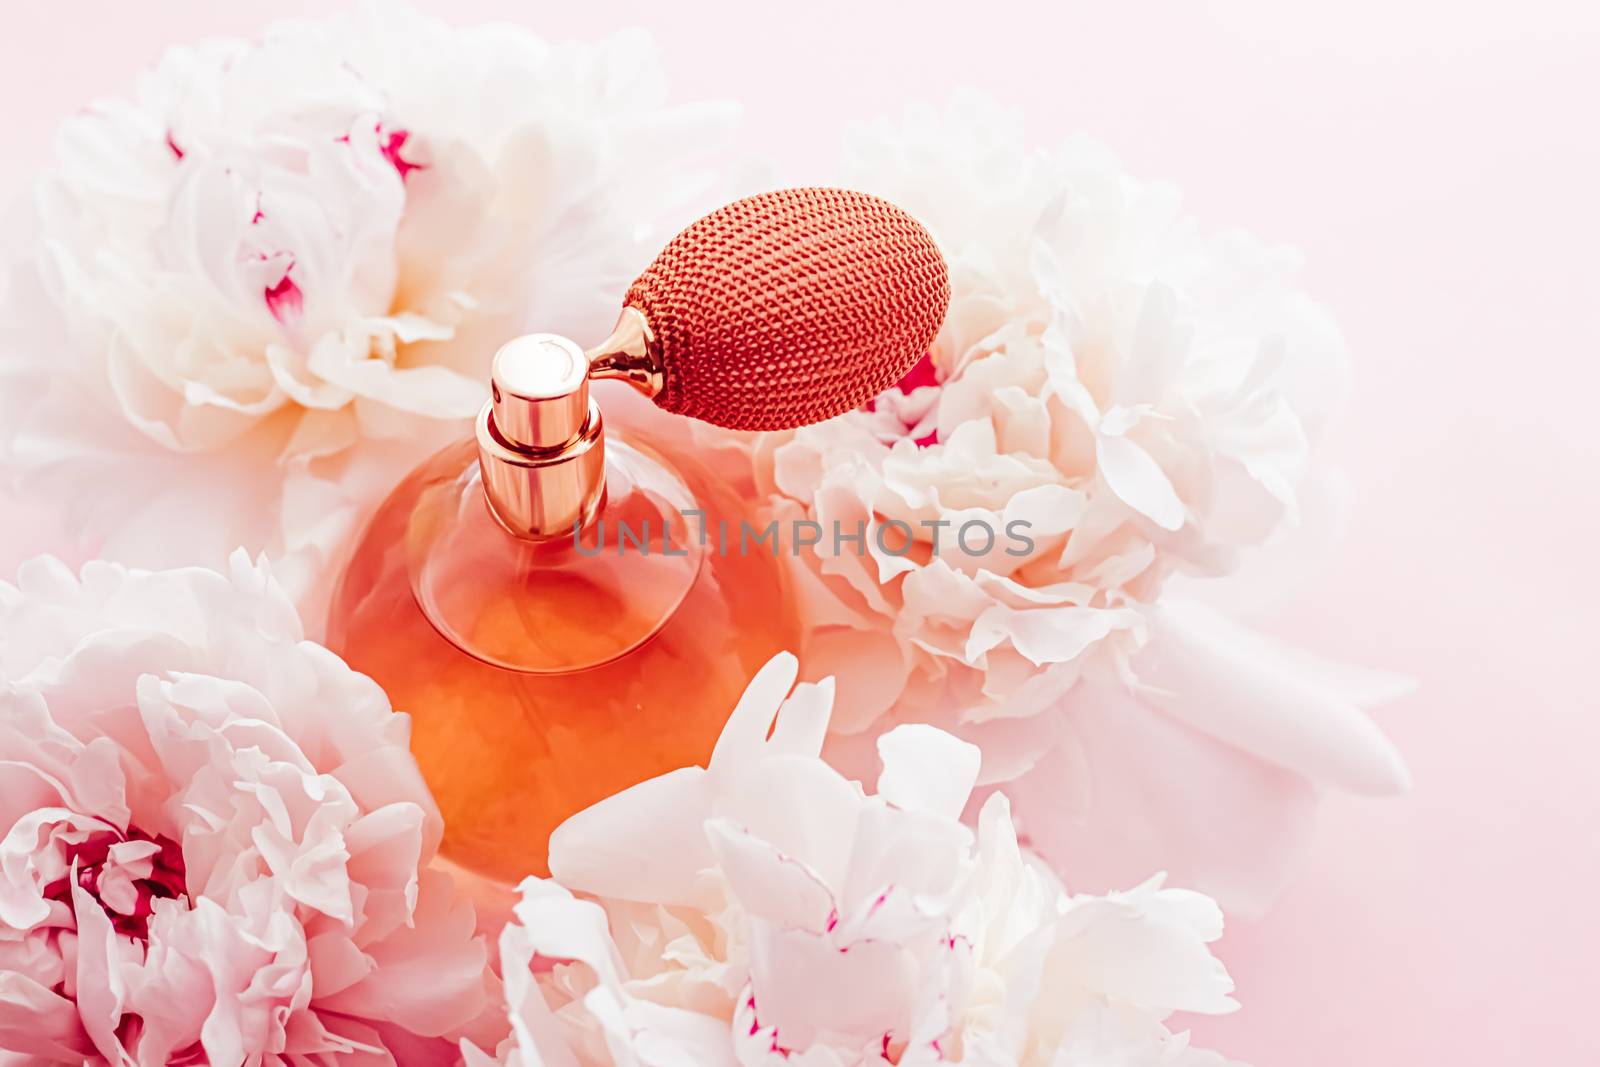 Vintage fragrance bottle as luxe perfume product on background of peony flowers, parfum ad and beauty branding by Anneleven